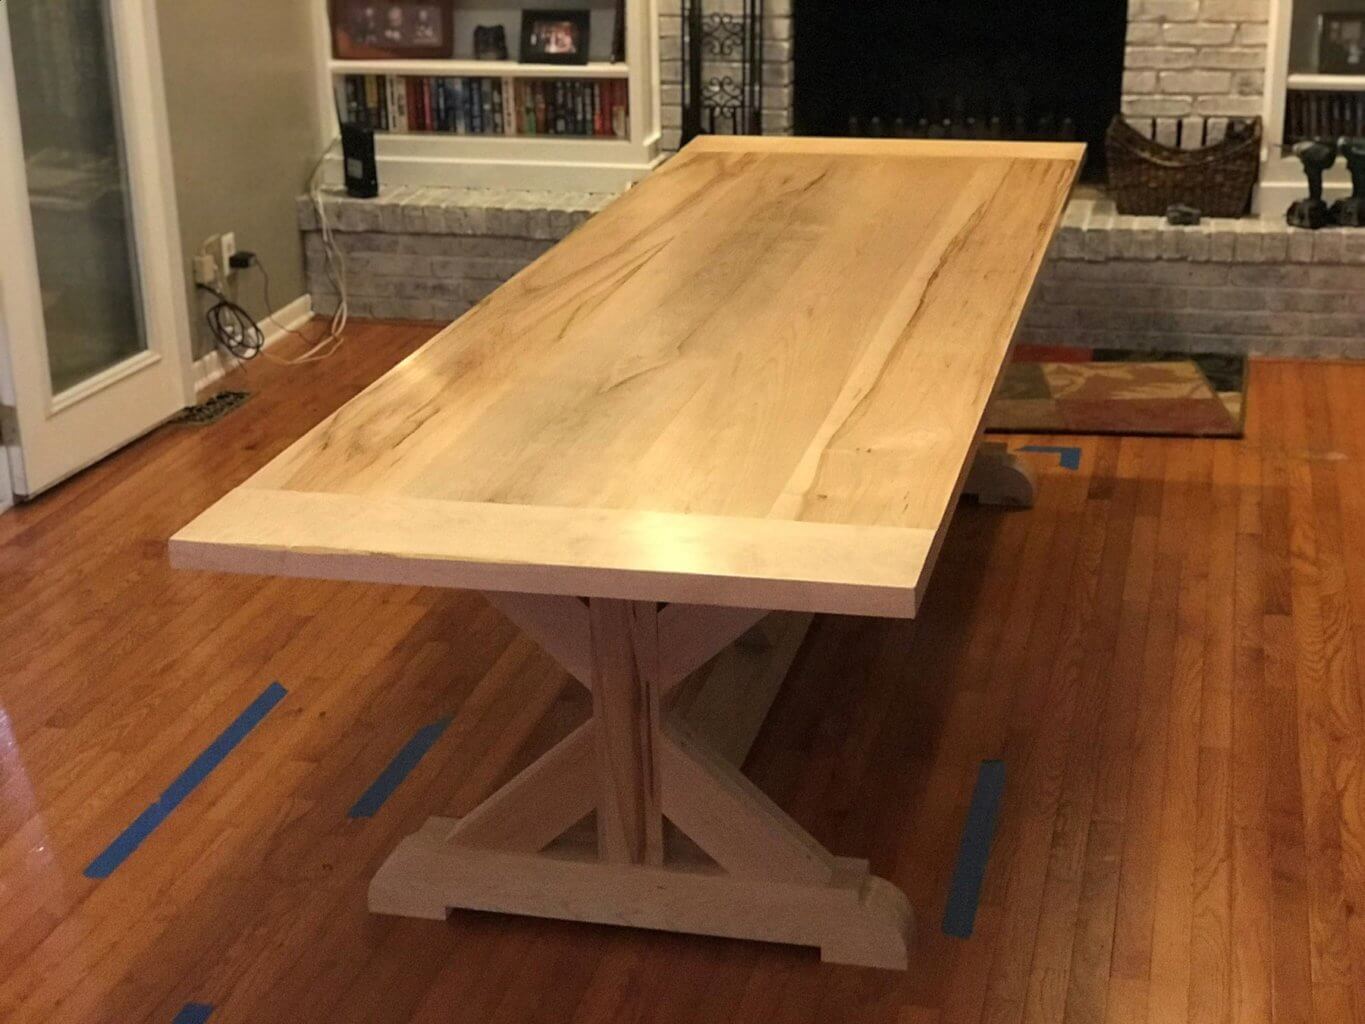 Early American Reproduction Maple Dining Room Table